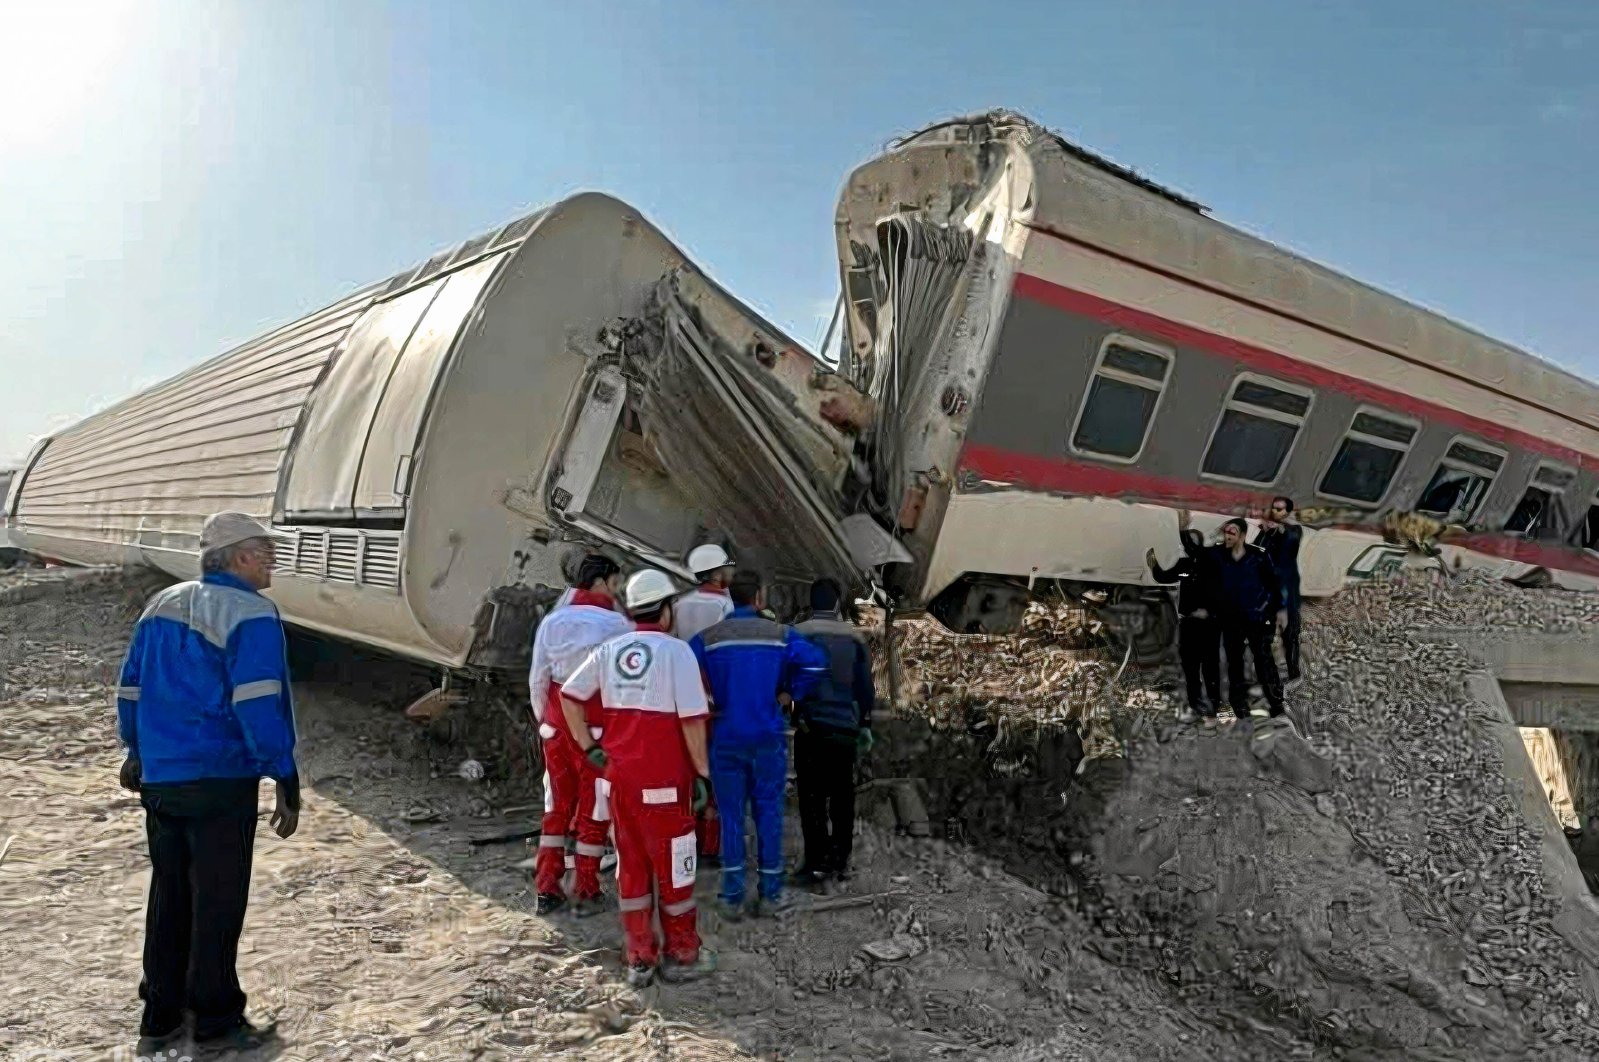 Rescuers at the scene of a train derailment near the central Iranian city of Tabas on the line between Mashhad and Yazd, ıran, June 8, 2022. (Iranian Red Crescent via AFP)